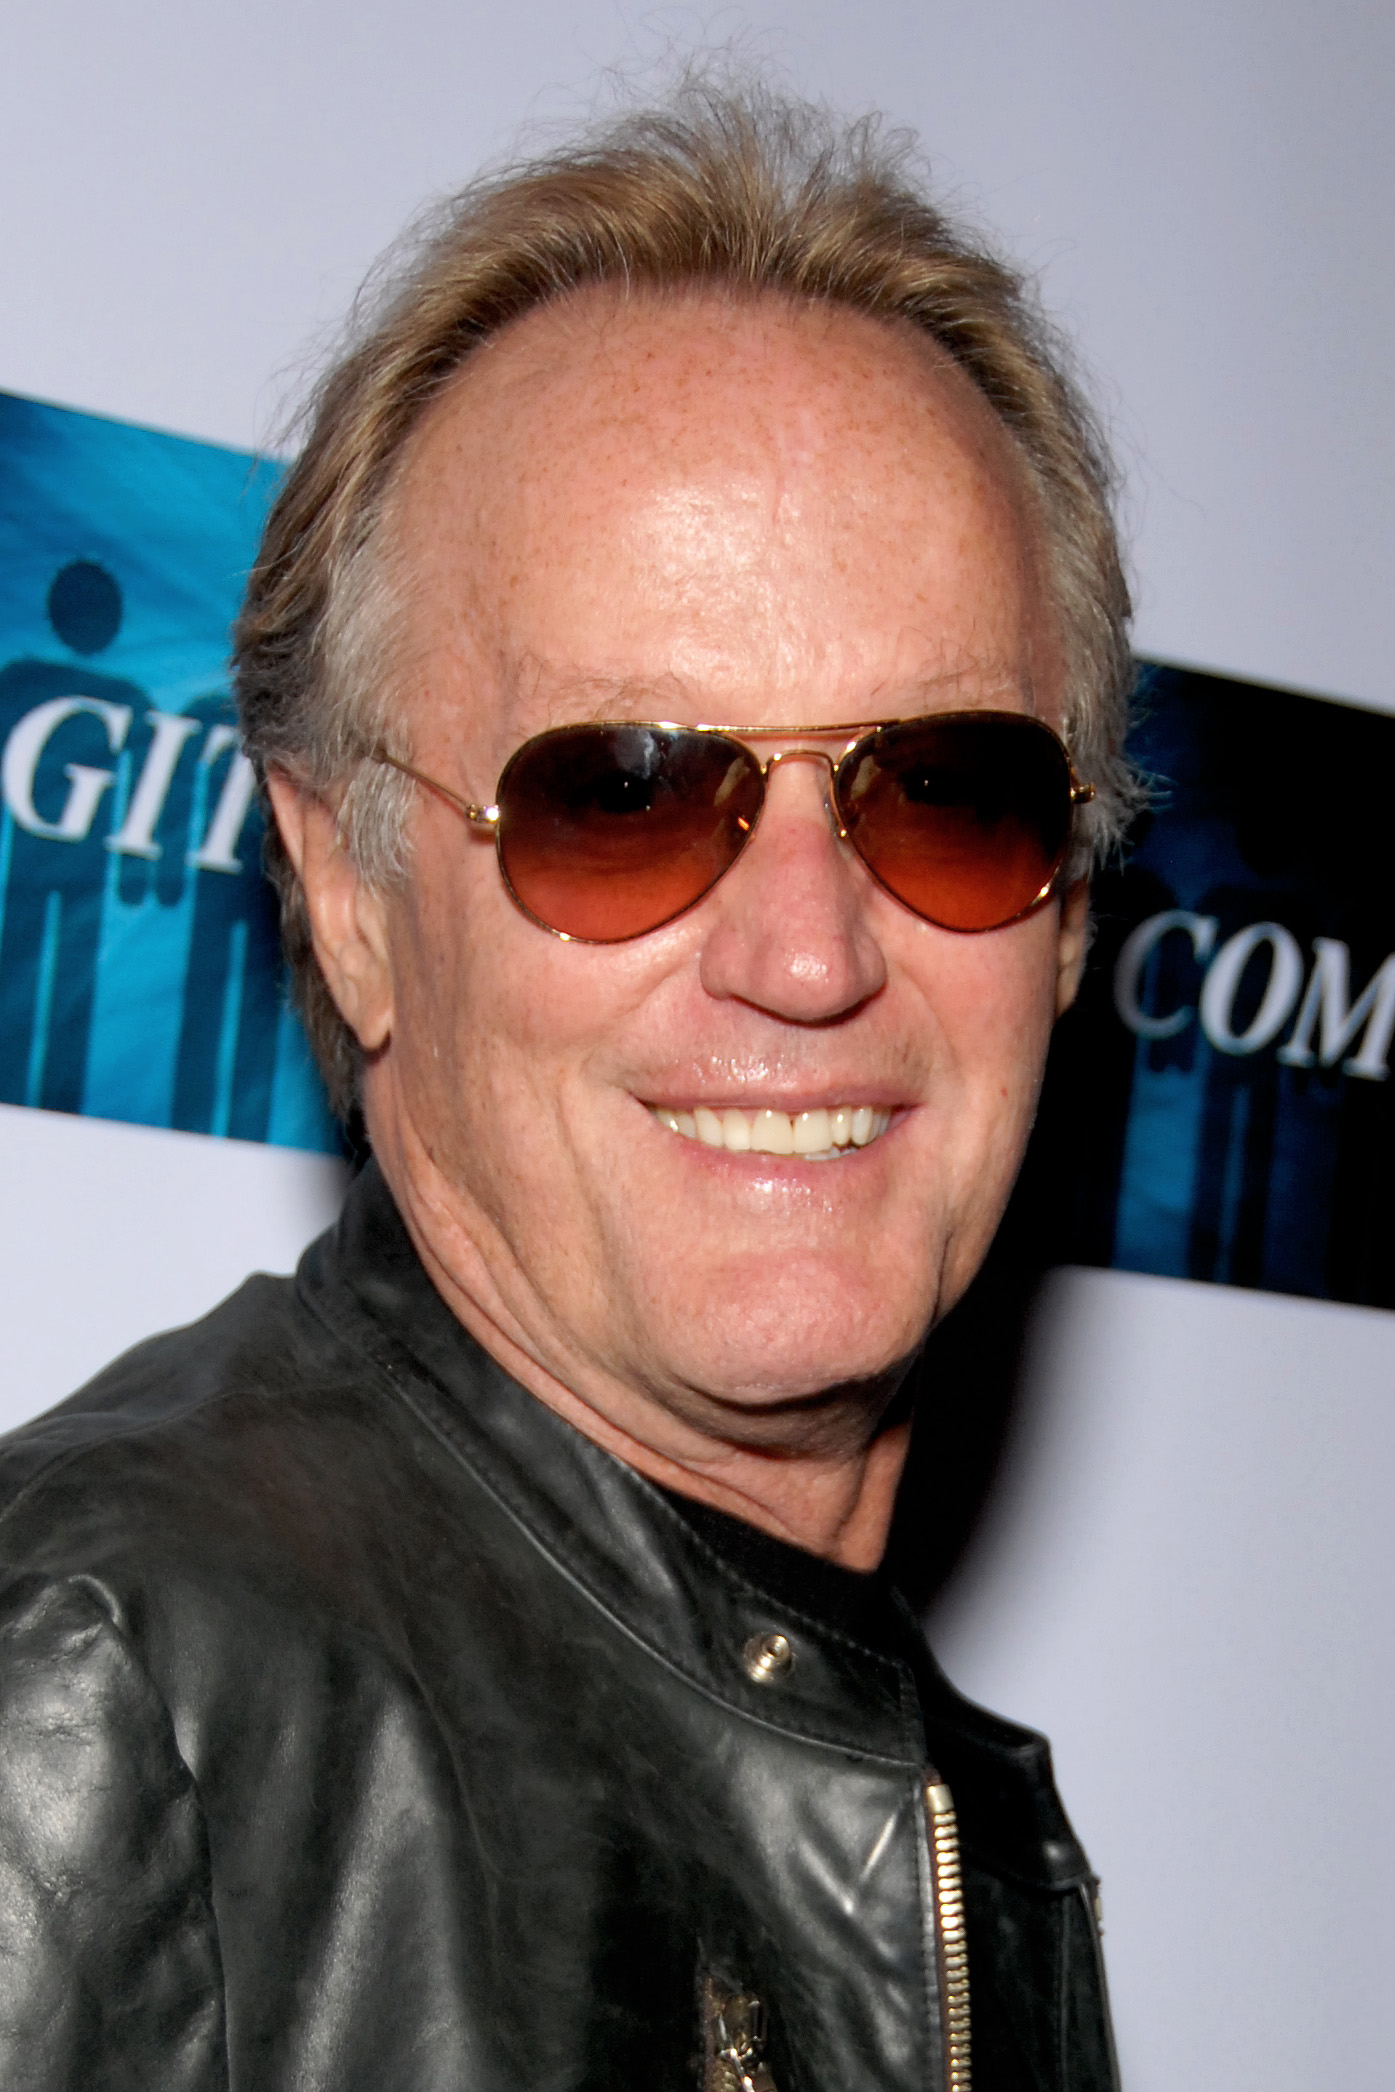 Entertainment News Roundup: 'Easy Rider' actor Peter Fonda dead at age 79; 'Good Boys' leads crowded weekend with $21 million